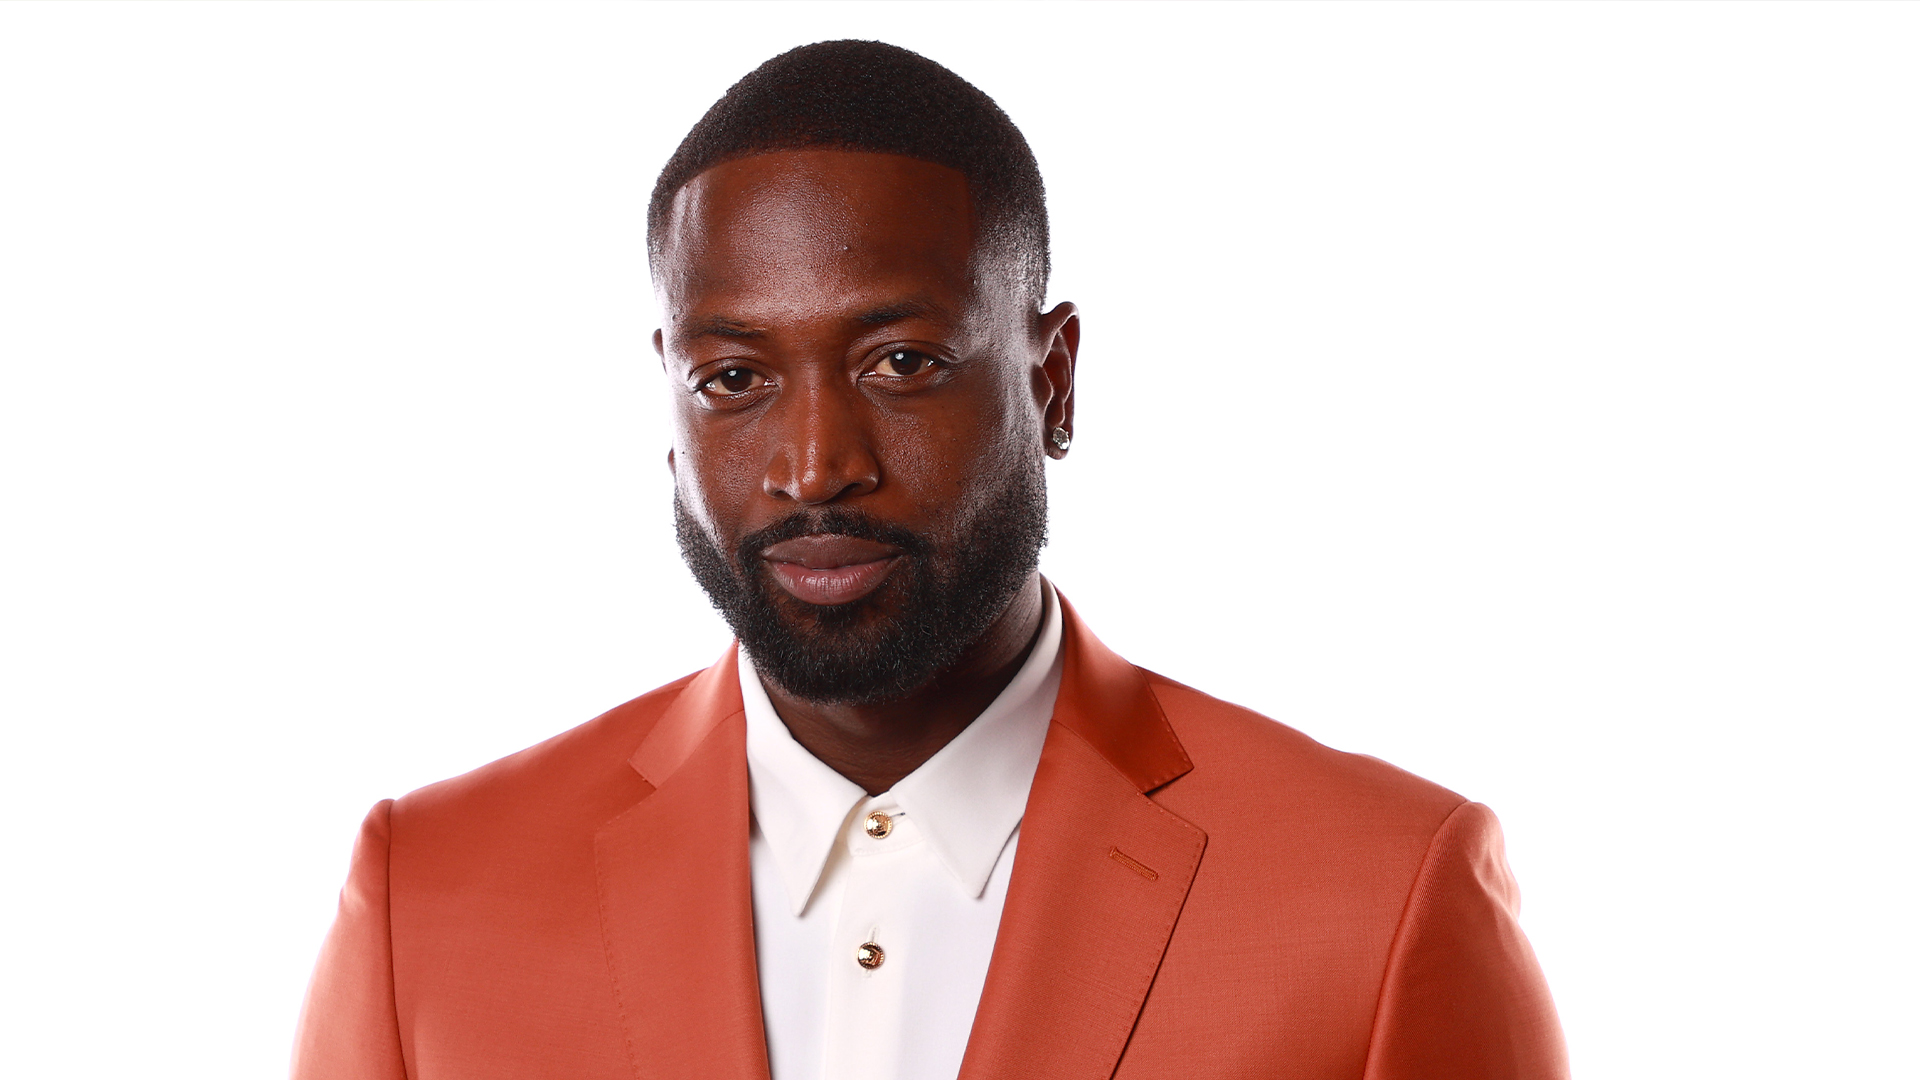 Dwyane Wade Celebrates The Launch Of His 'Hall Of Flame' Cannabis Line In Partnership With Jeeter